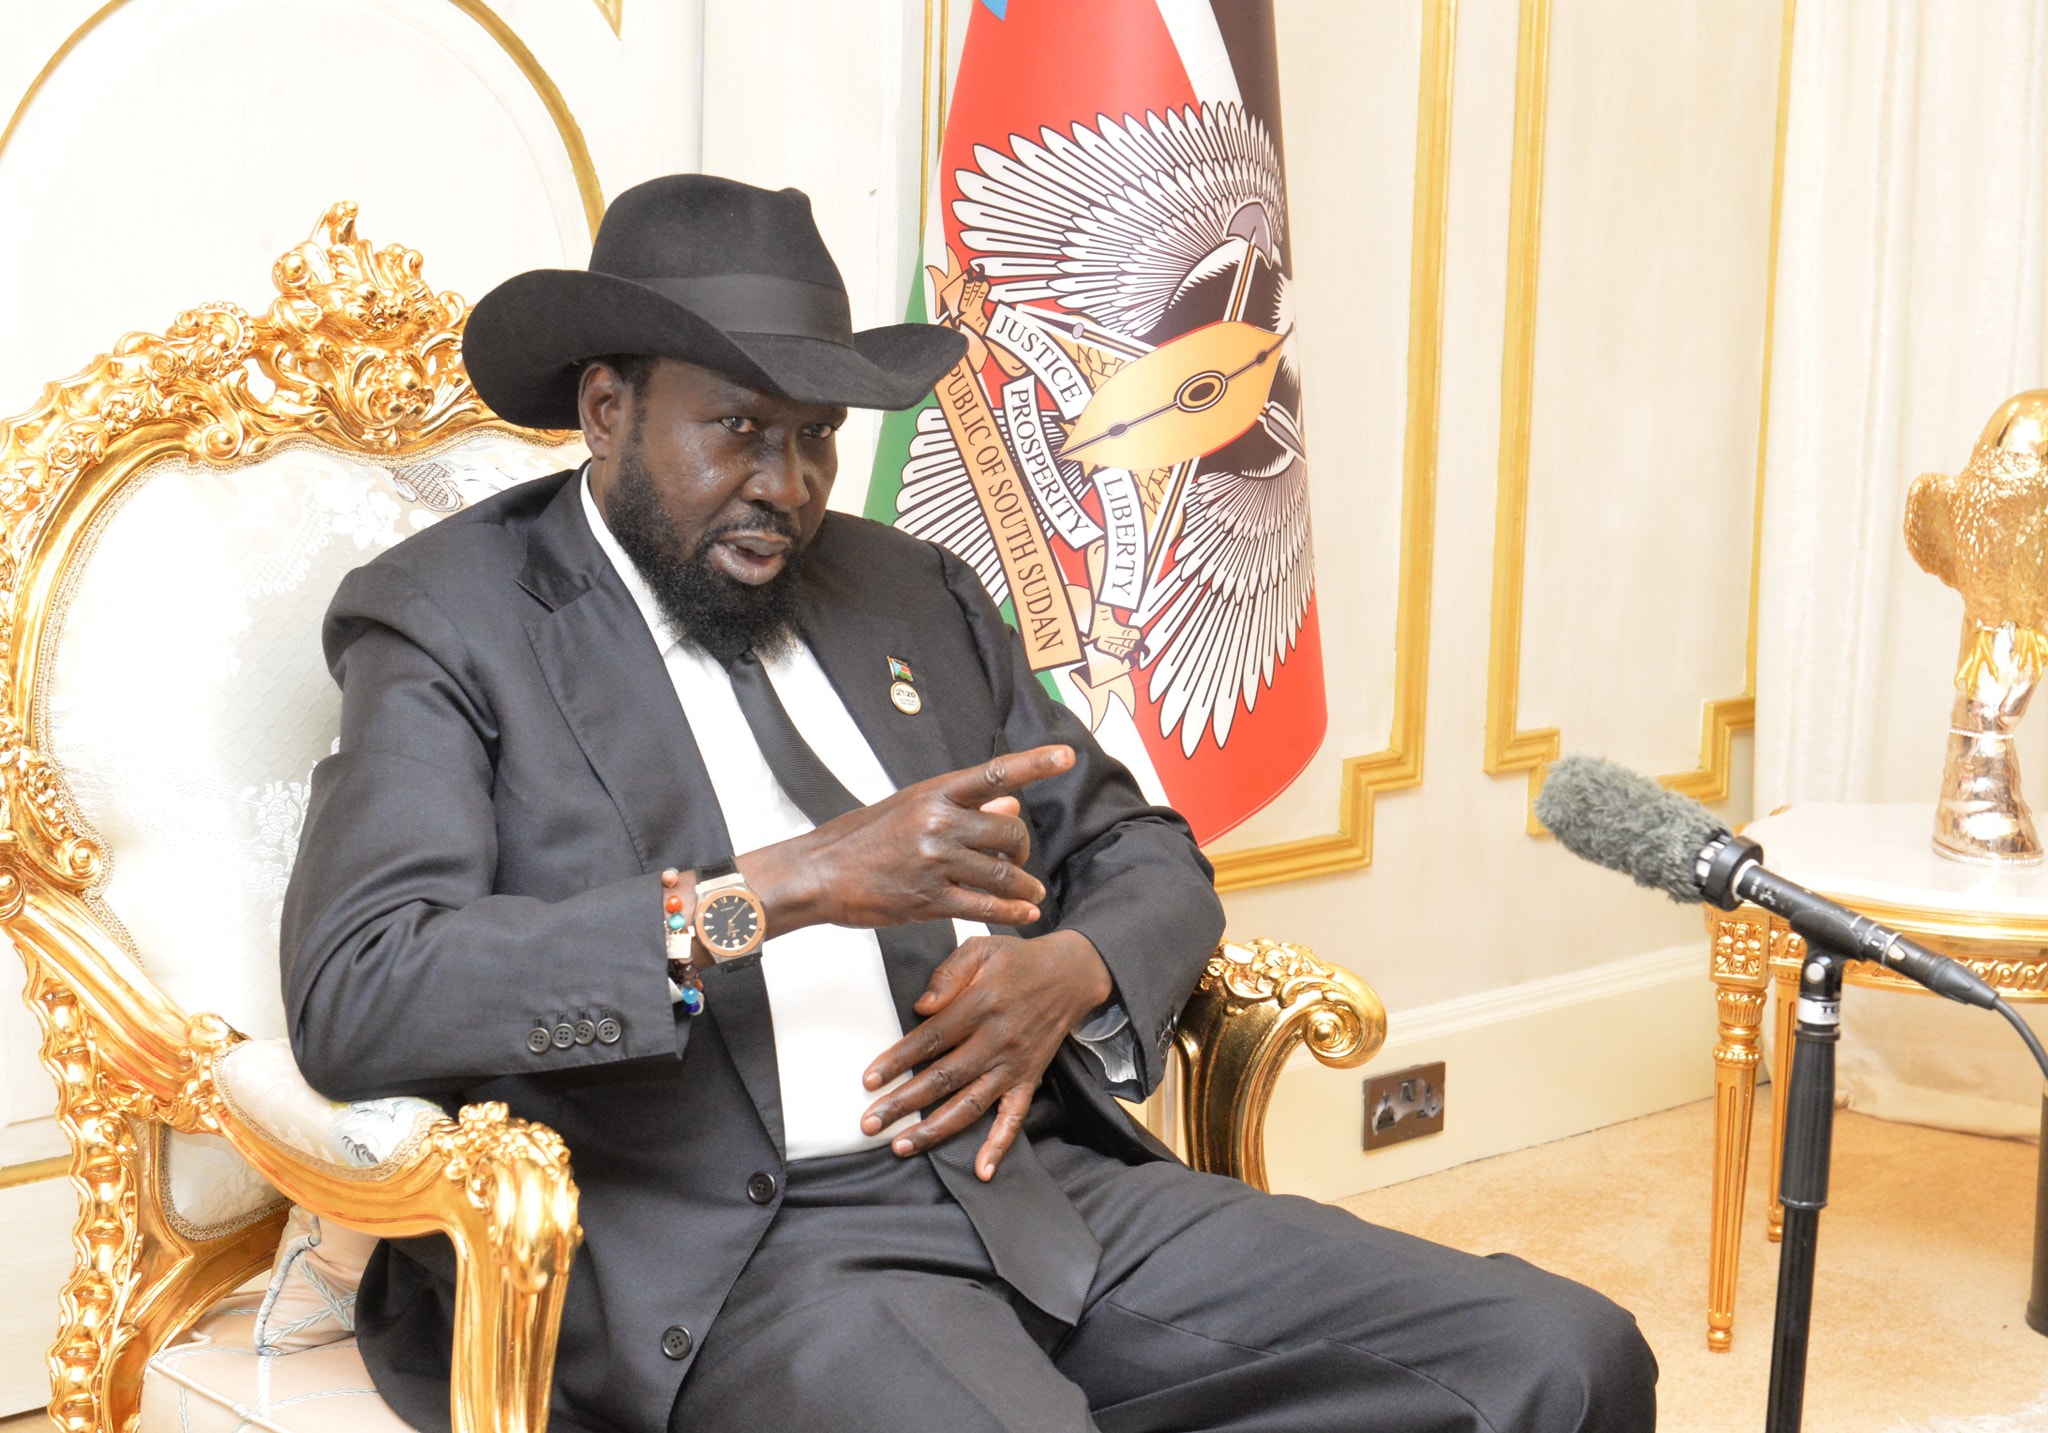 Kiir’s office working to trace orphans’ pledge, Ateny